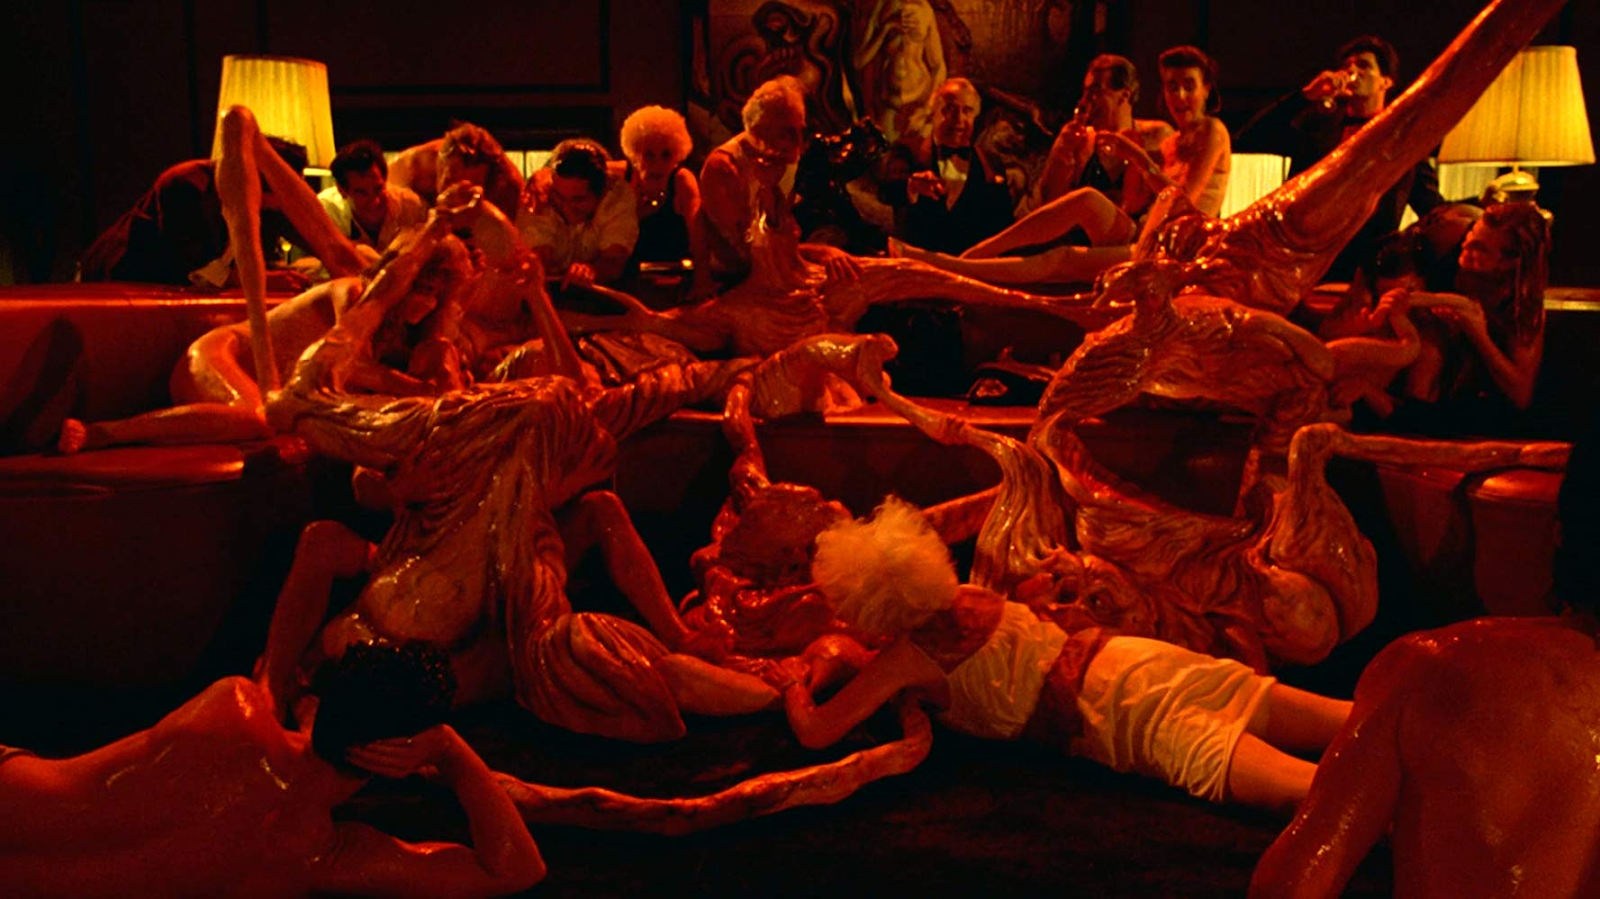 Society (1989). A grotesque scene illuminated in red light, what appears to be tangle of bodies, some of which look like masses of flesh and organs, slick with blood.